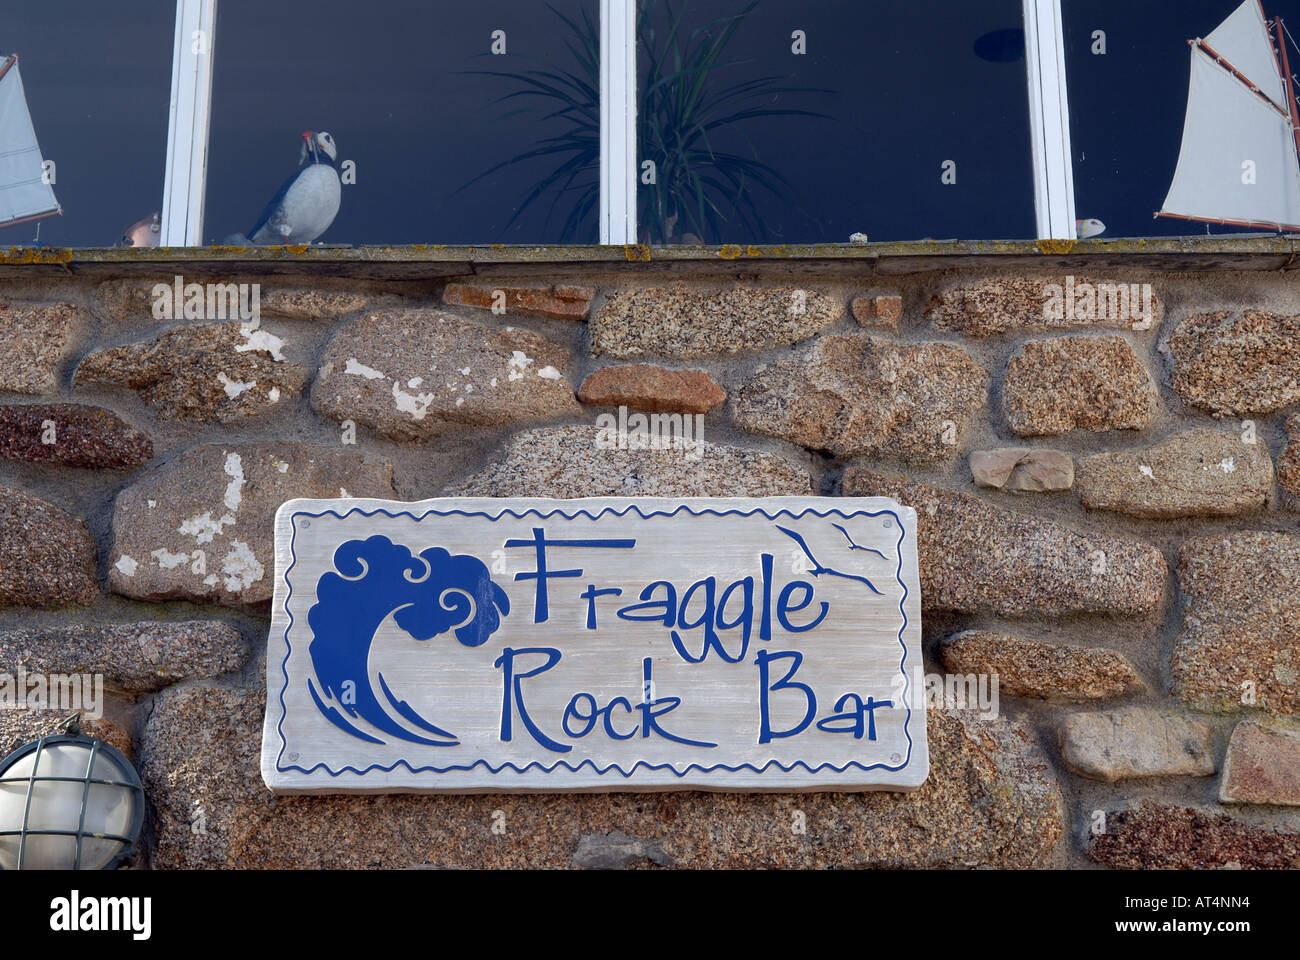 Fraggle Rock Bar, Bryher, isole Scilly, UK. Foto Stock